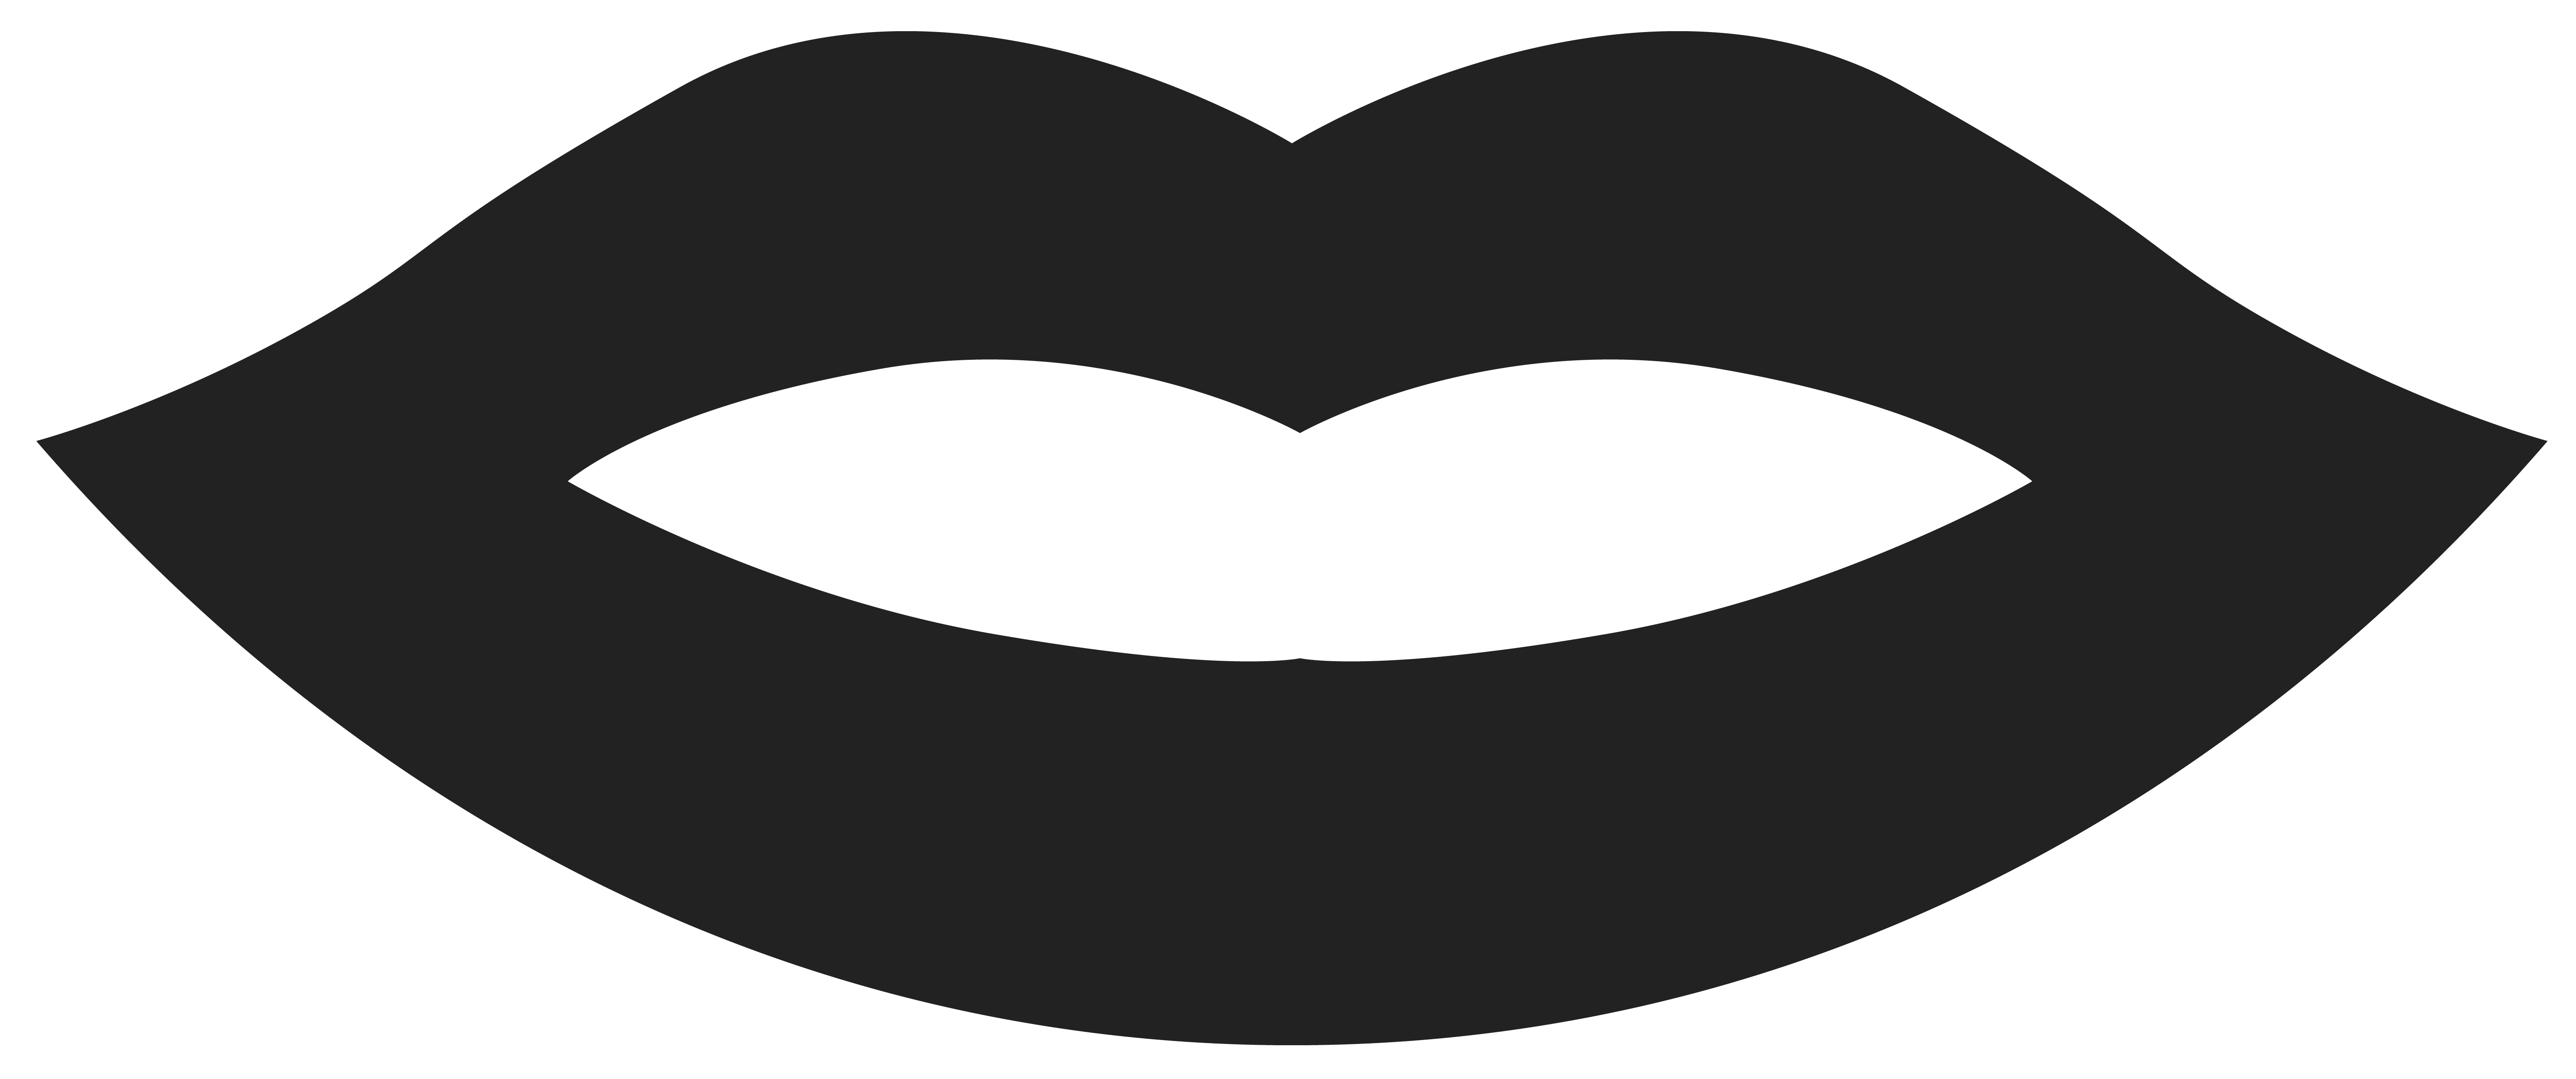 Movember lips png image. Mouth clipart black and white